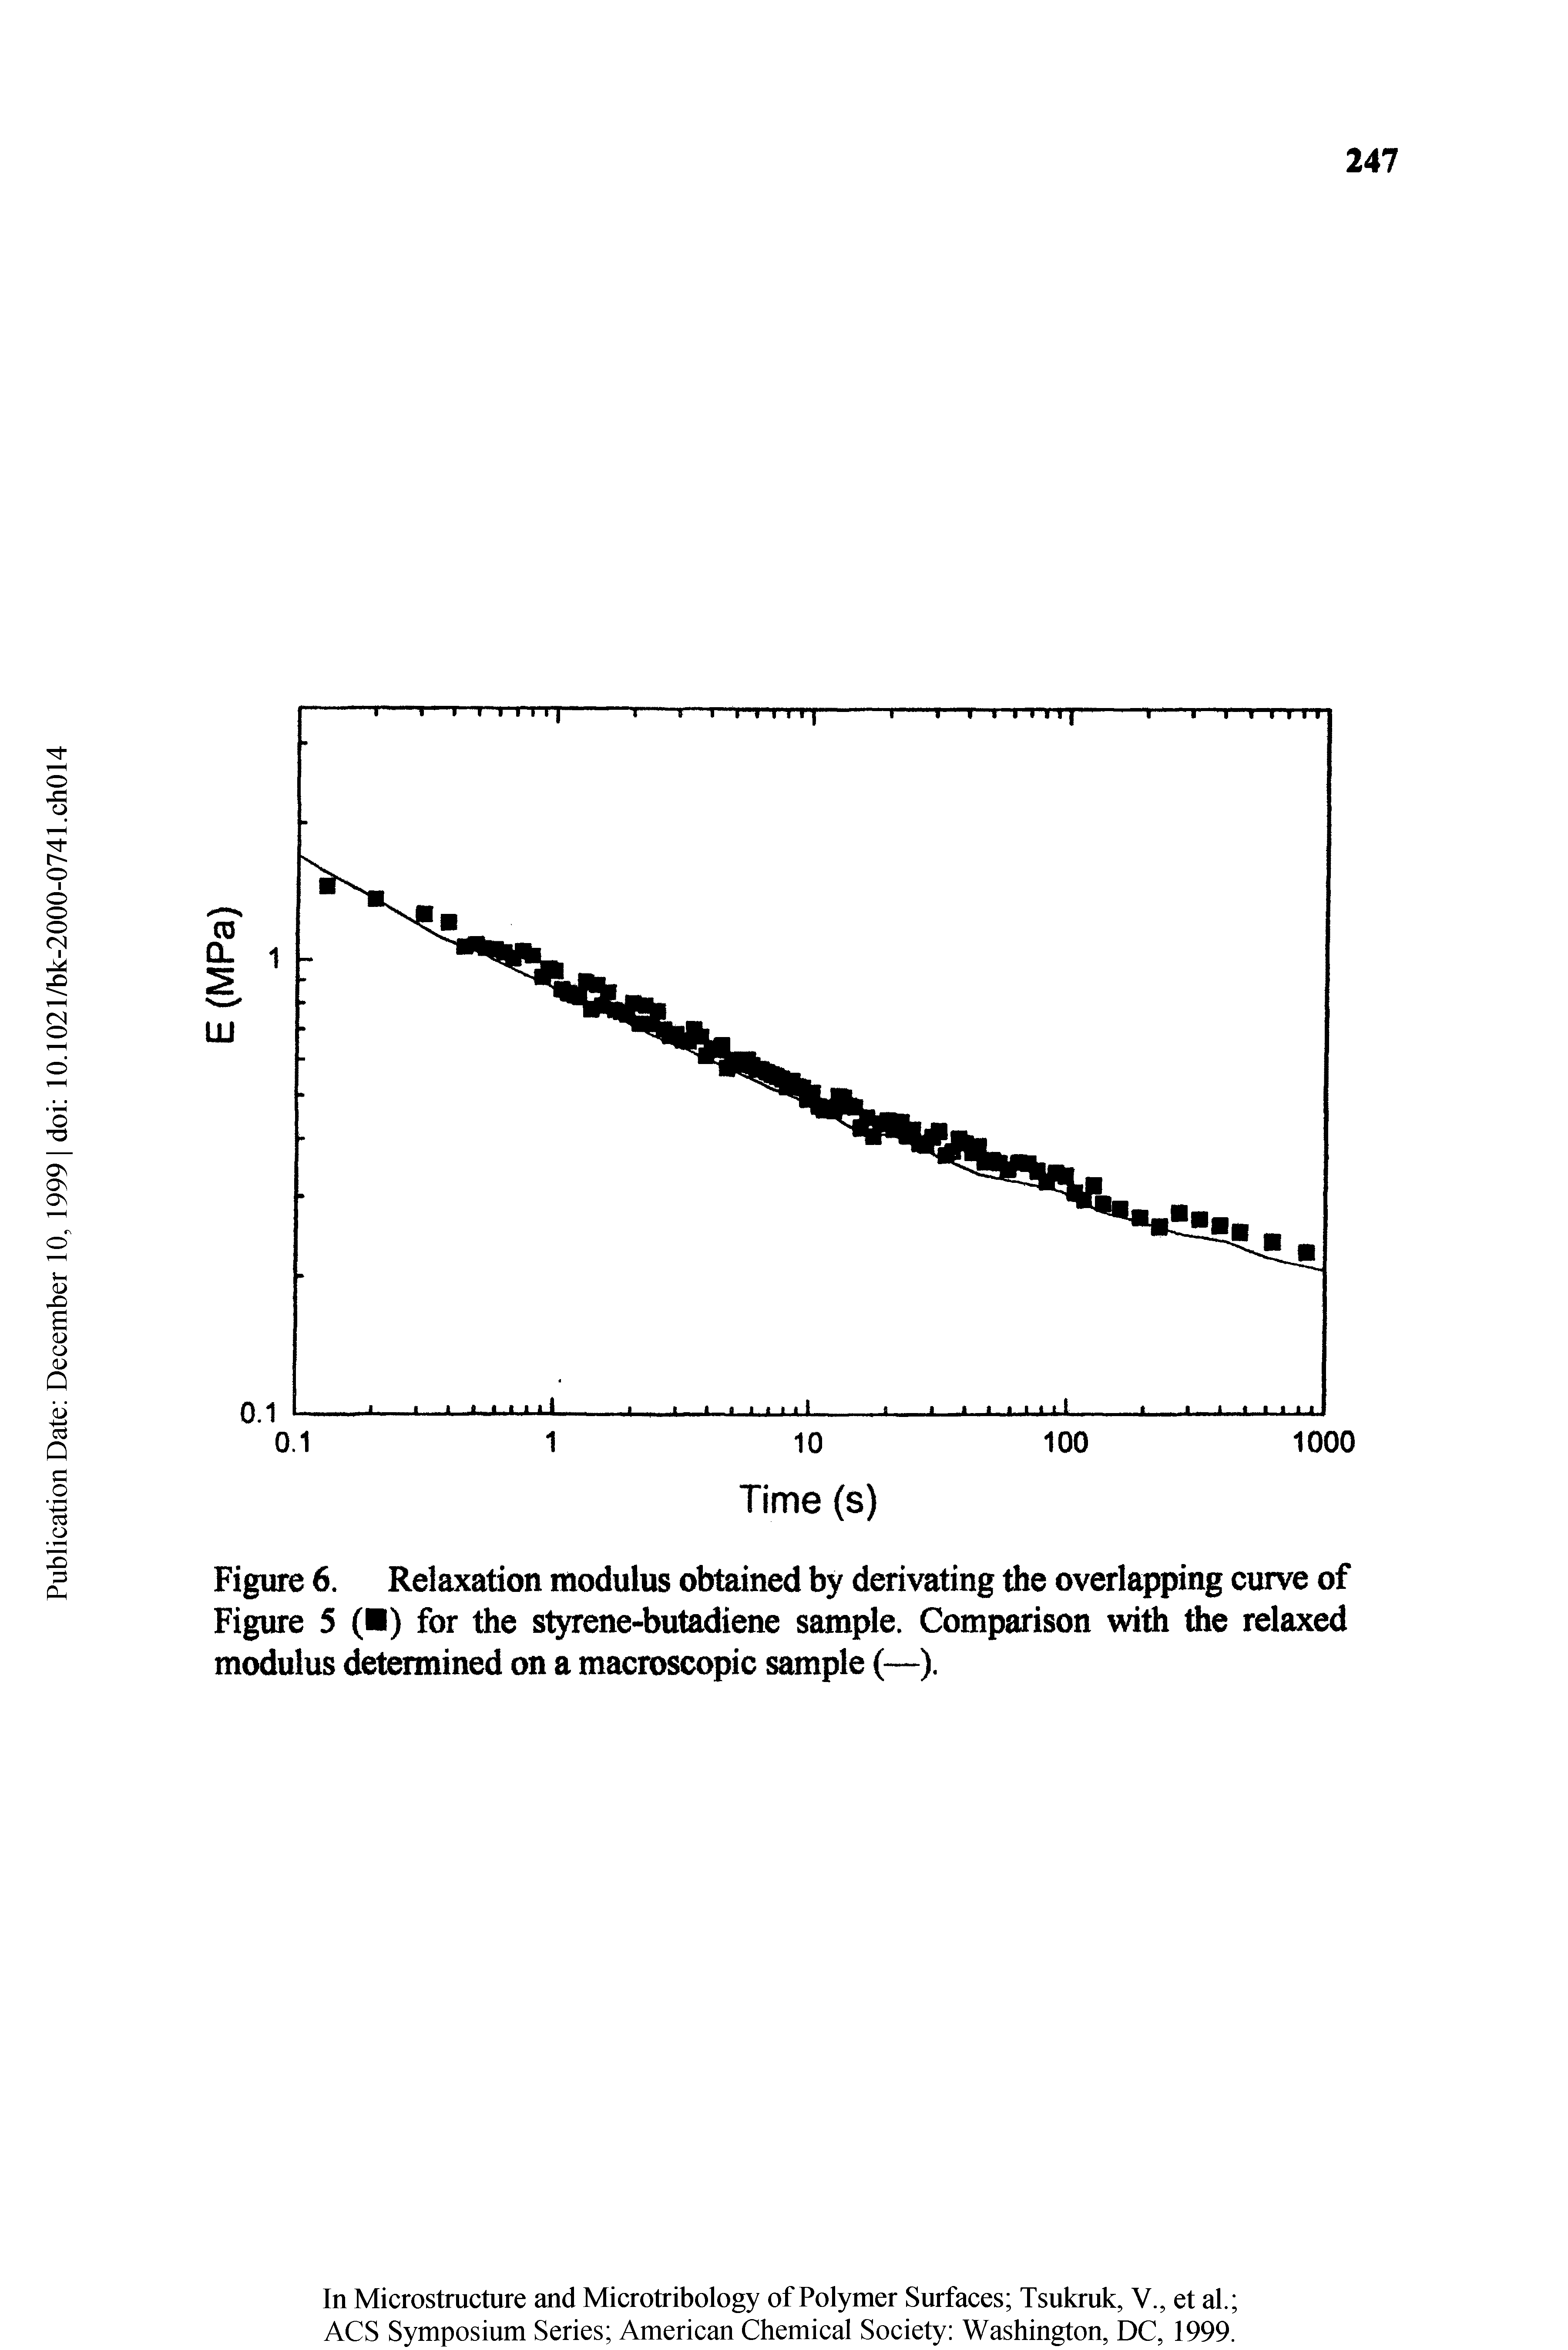 Figure 6. Relaxation modulus obtained by derivating the overlapping curve of Figure 5 ( ) for the styrene-butadiene sample. Comparison with the relaxed modulus determined on a macroscopic sample (—).